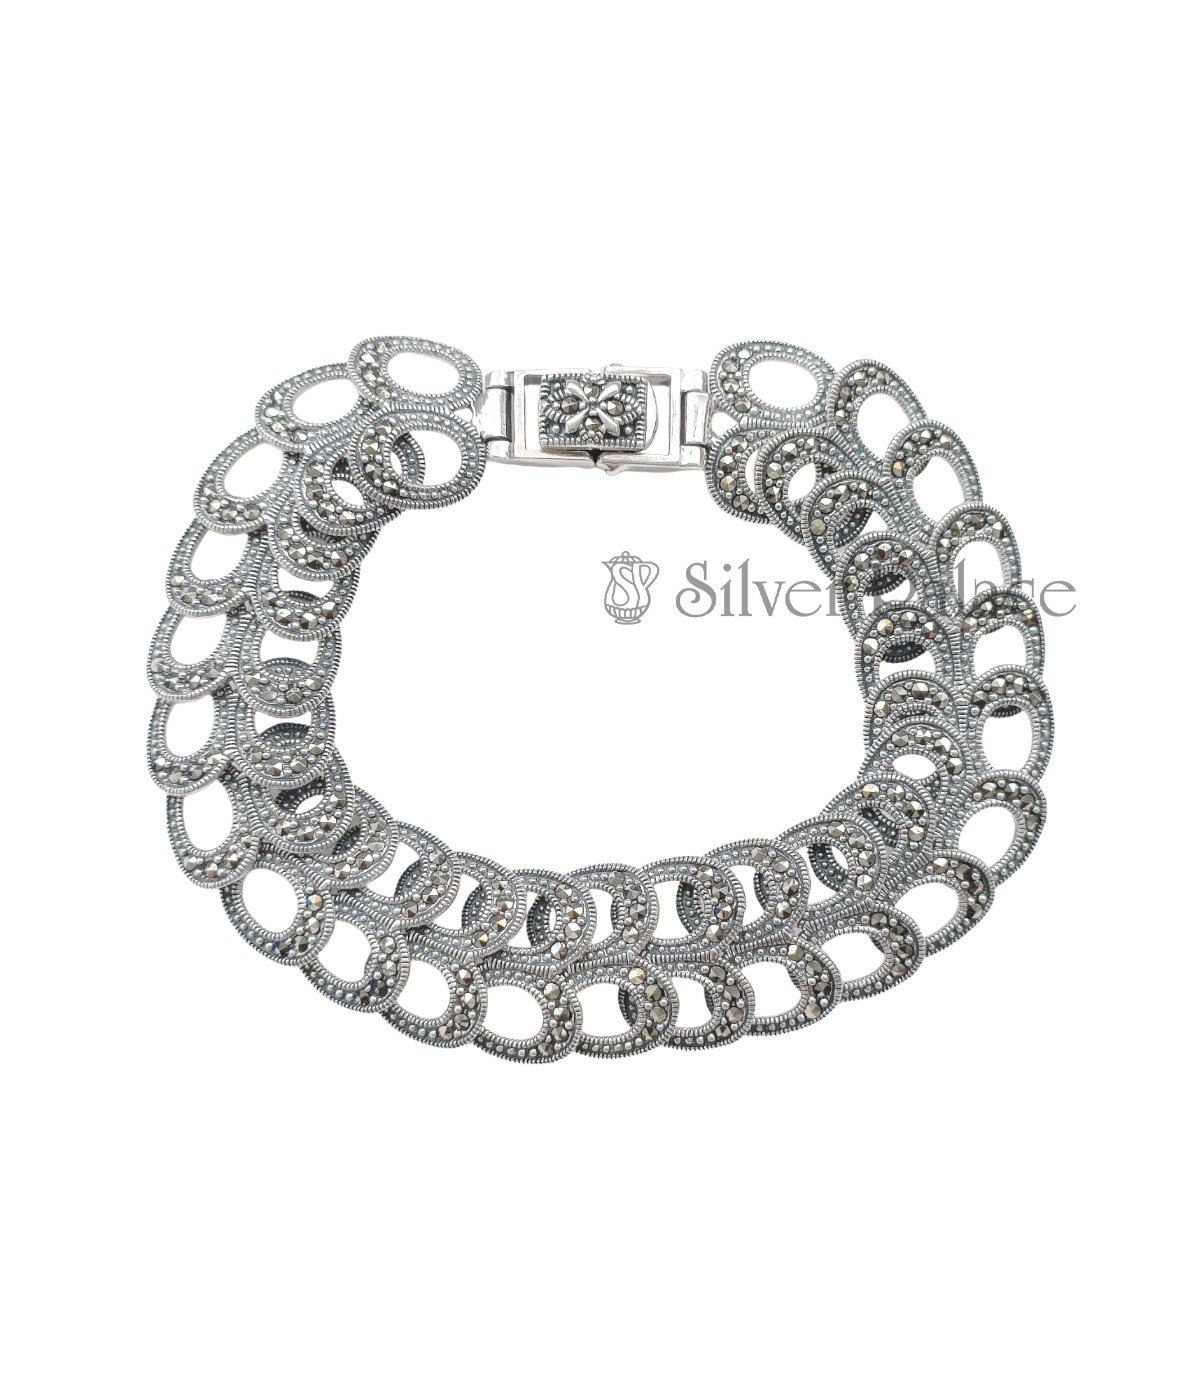 OXIDISED SILVER CHAIN LINK BRACELET FOR GIRLS AND LADIES WITH MARCASITE STONES